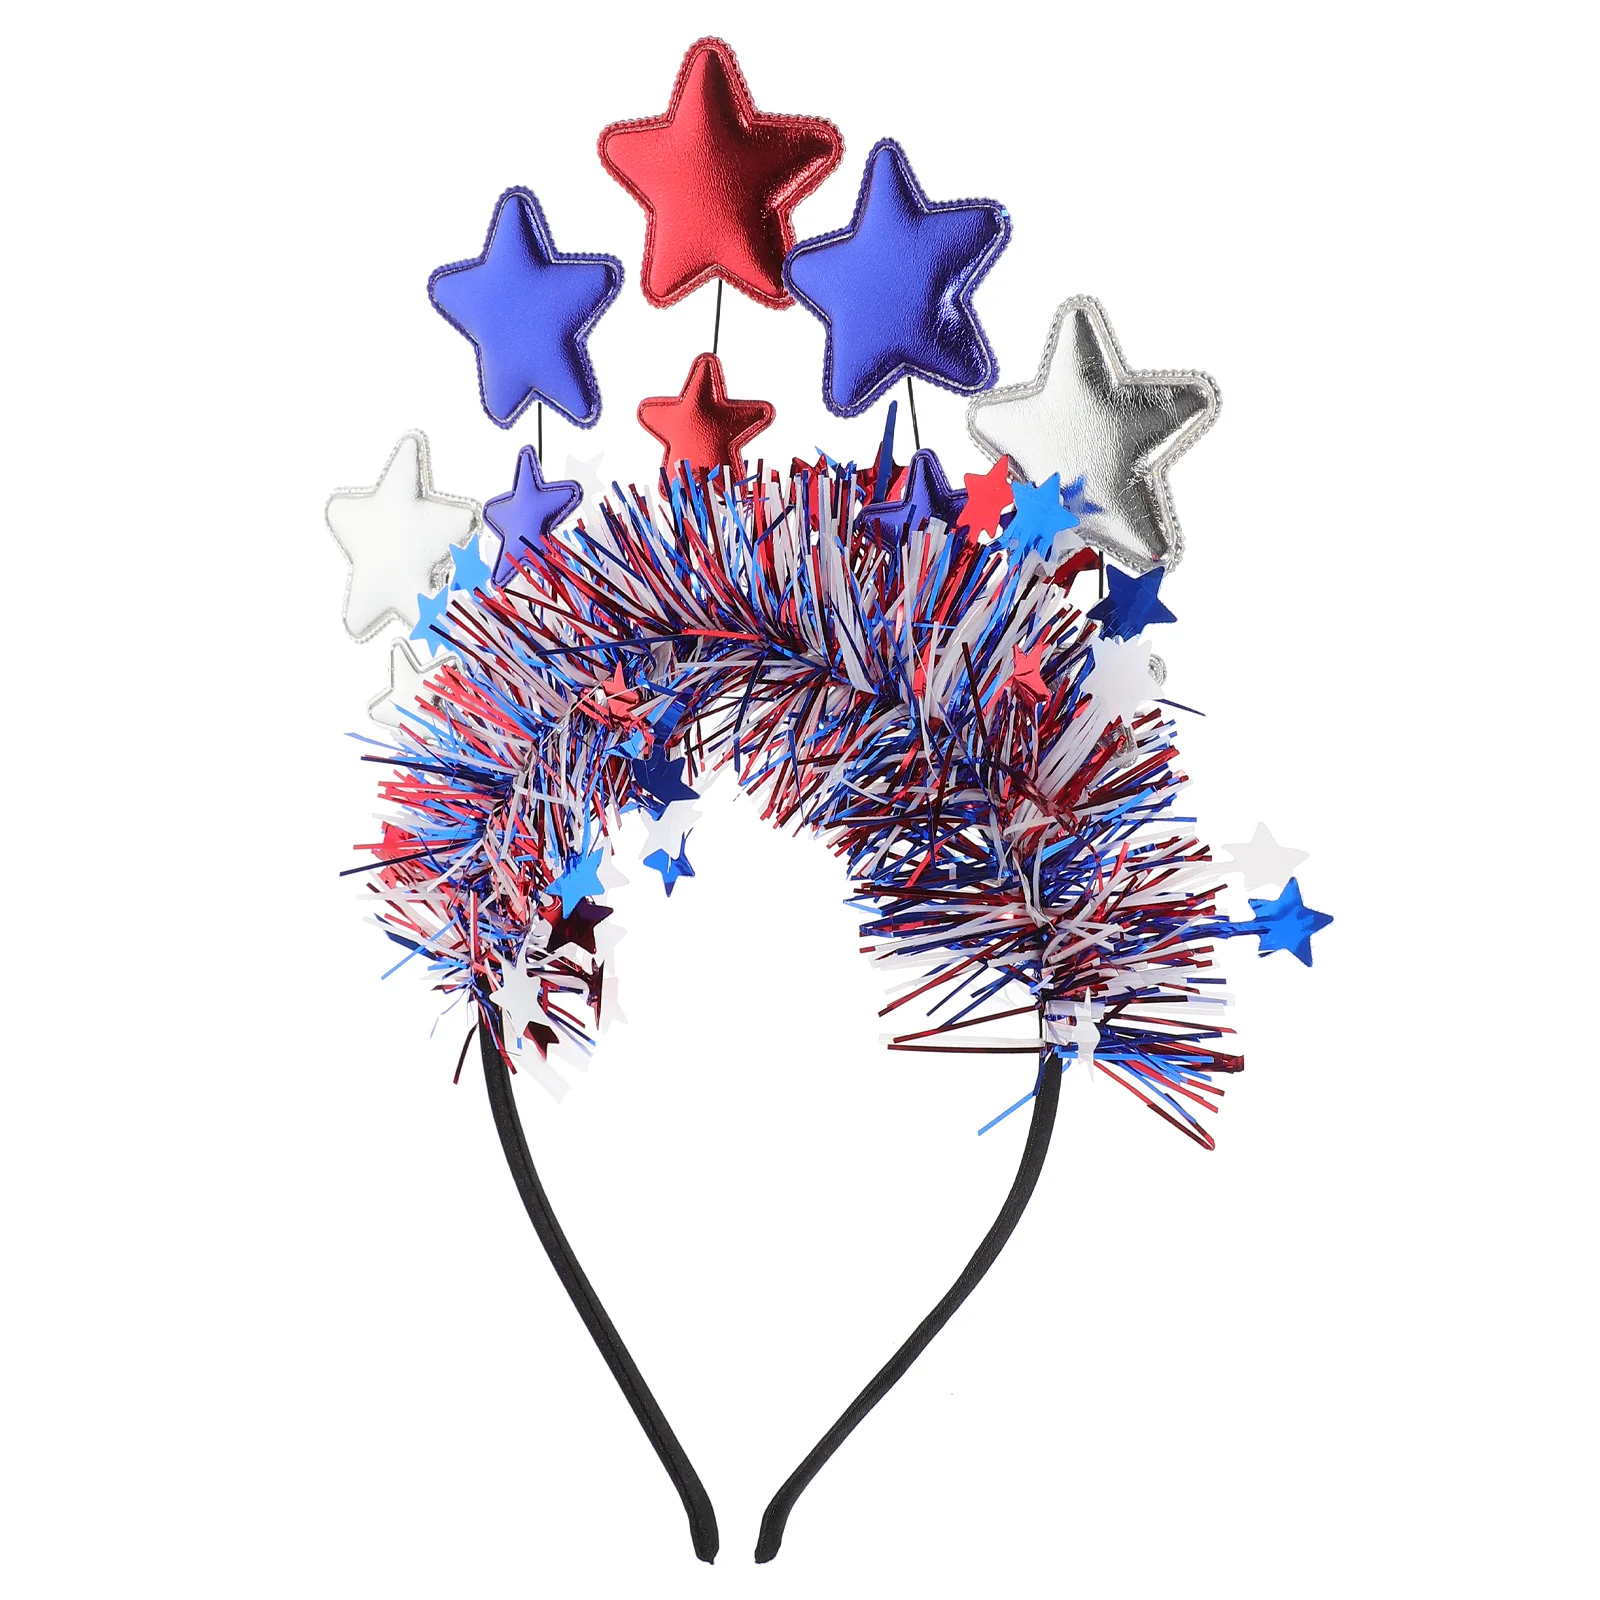 Headband Headbands for Kids 4th of July Decorations Carnival Hair Decorate Accessories Cosplay Headdress Fabric Props digital painting supplies decor wall decorations paintings diy number oil hand painting for decorative decorate picture